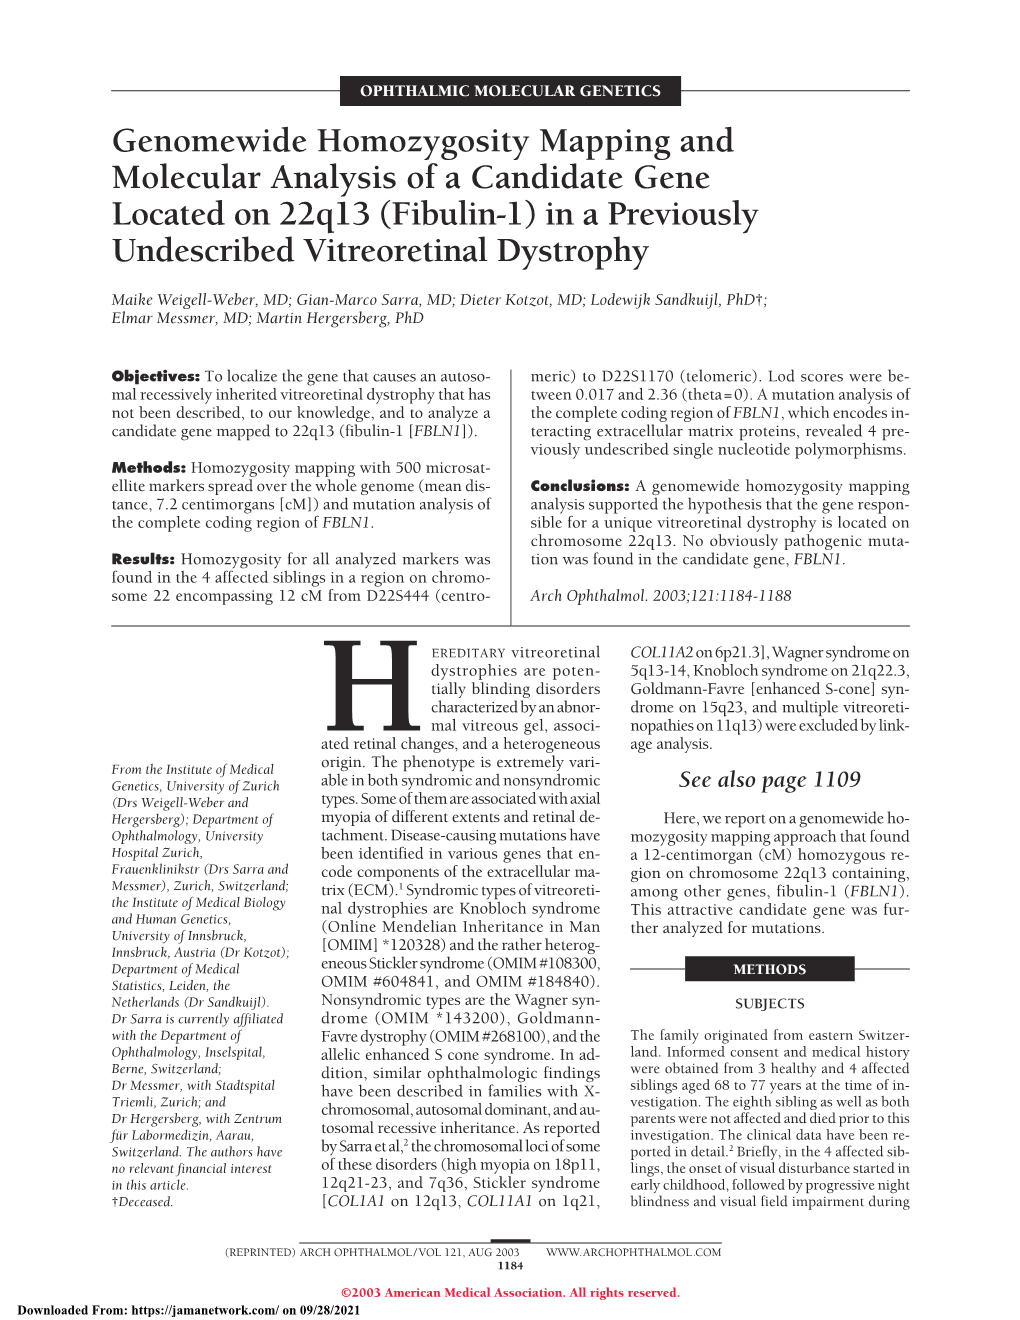 Genomewide Homozygosity Mapping and Molecular Analysis of a Candidate Gene Located on 22Q13 (Fibulin-1) in a Previously Undescribed Vitreoretinal Dystrophy